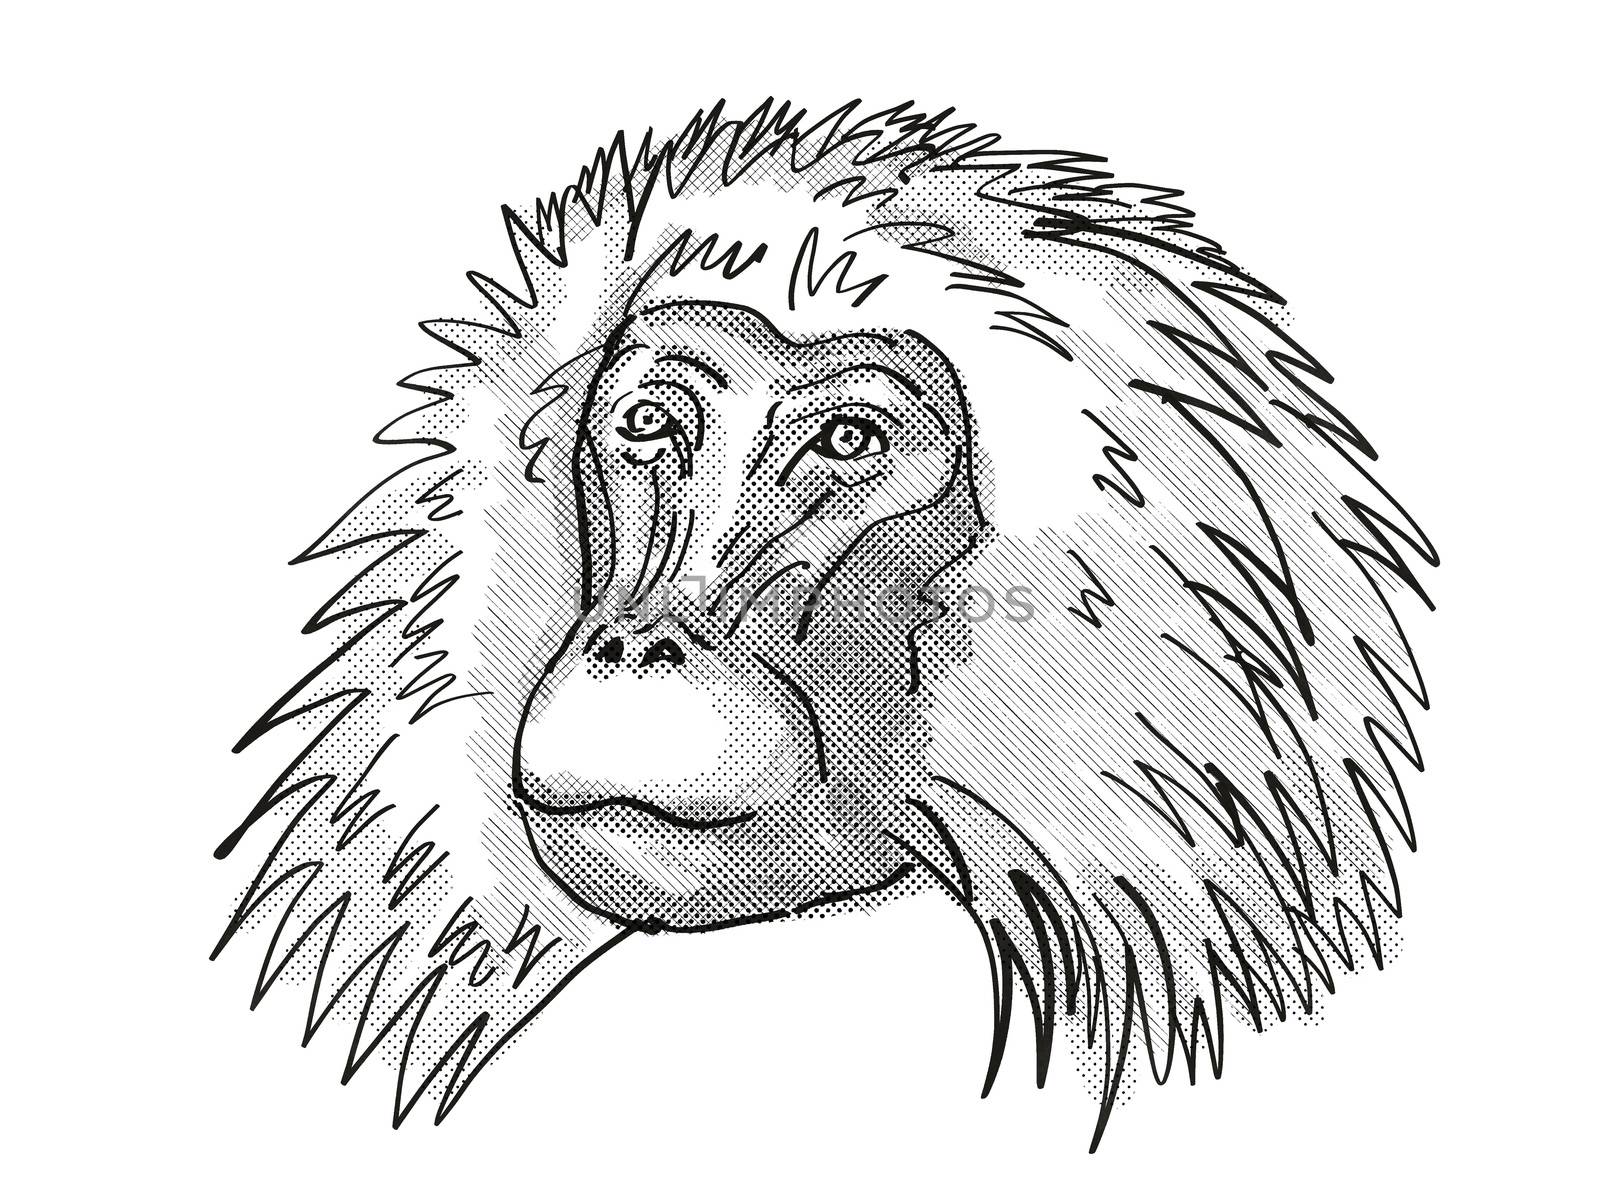 Retro cartoon style drawing head of a shaggy male Gelada, a monkey species viewed from front on isolated white background done in black and white